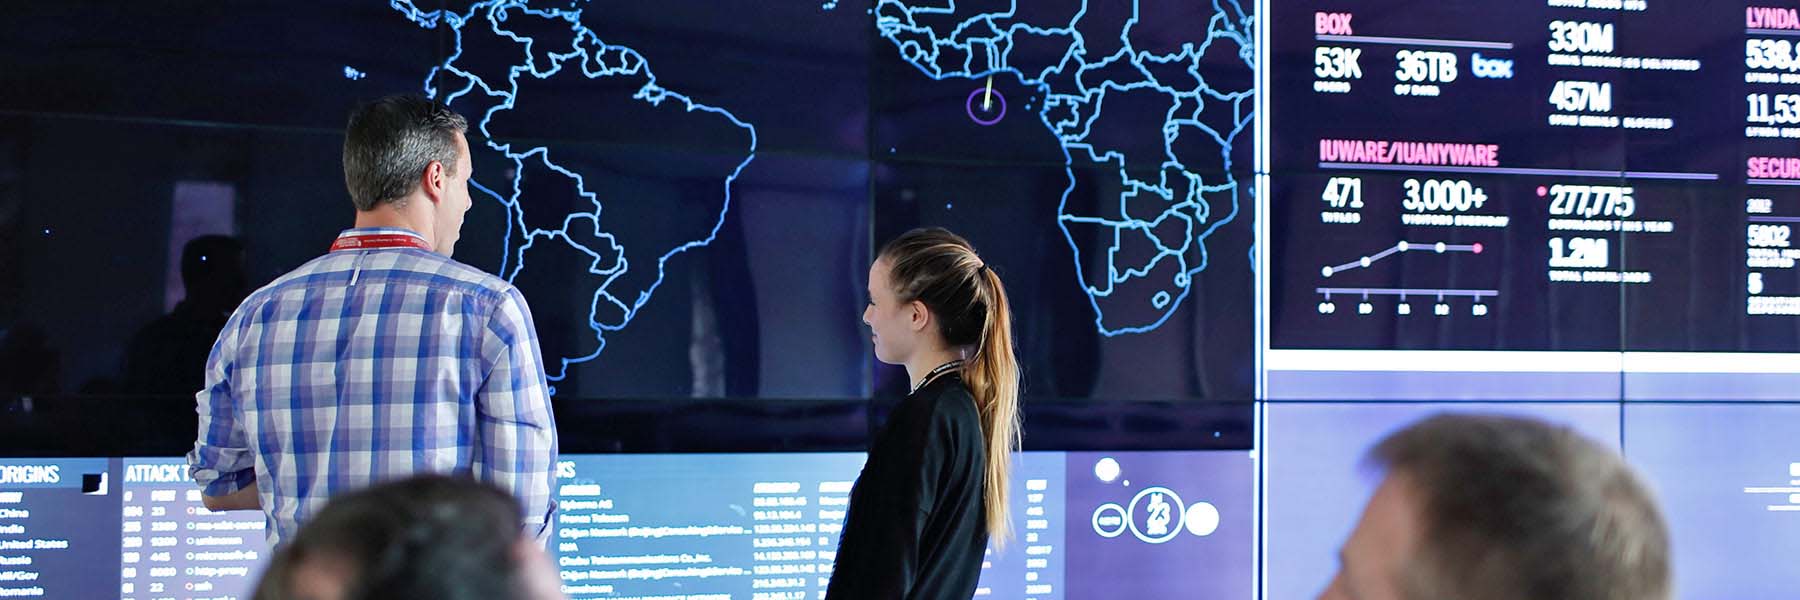 An employee shows a student a map and security data on screens in the Cyberinfrastructure Building.